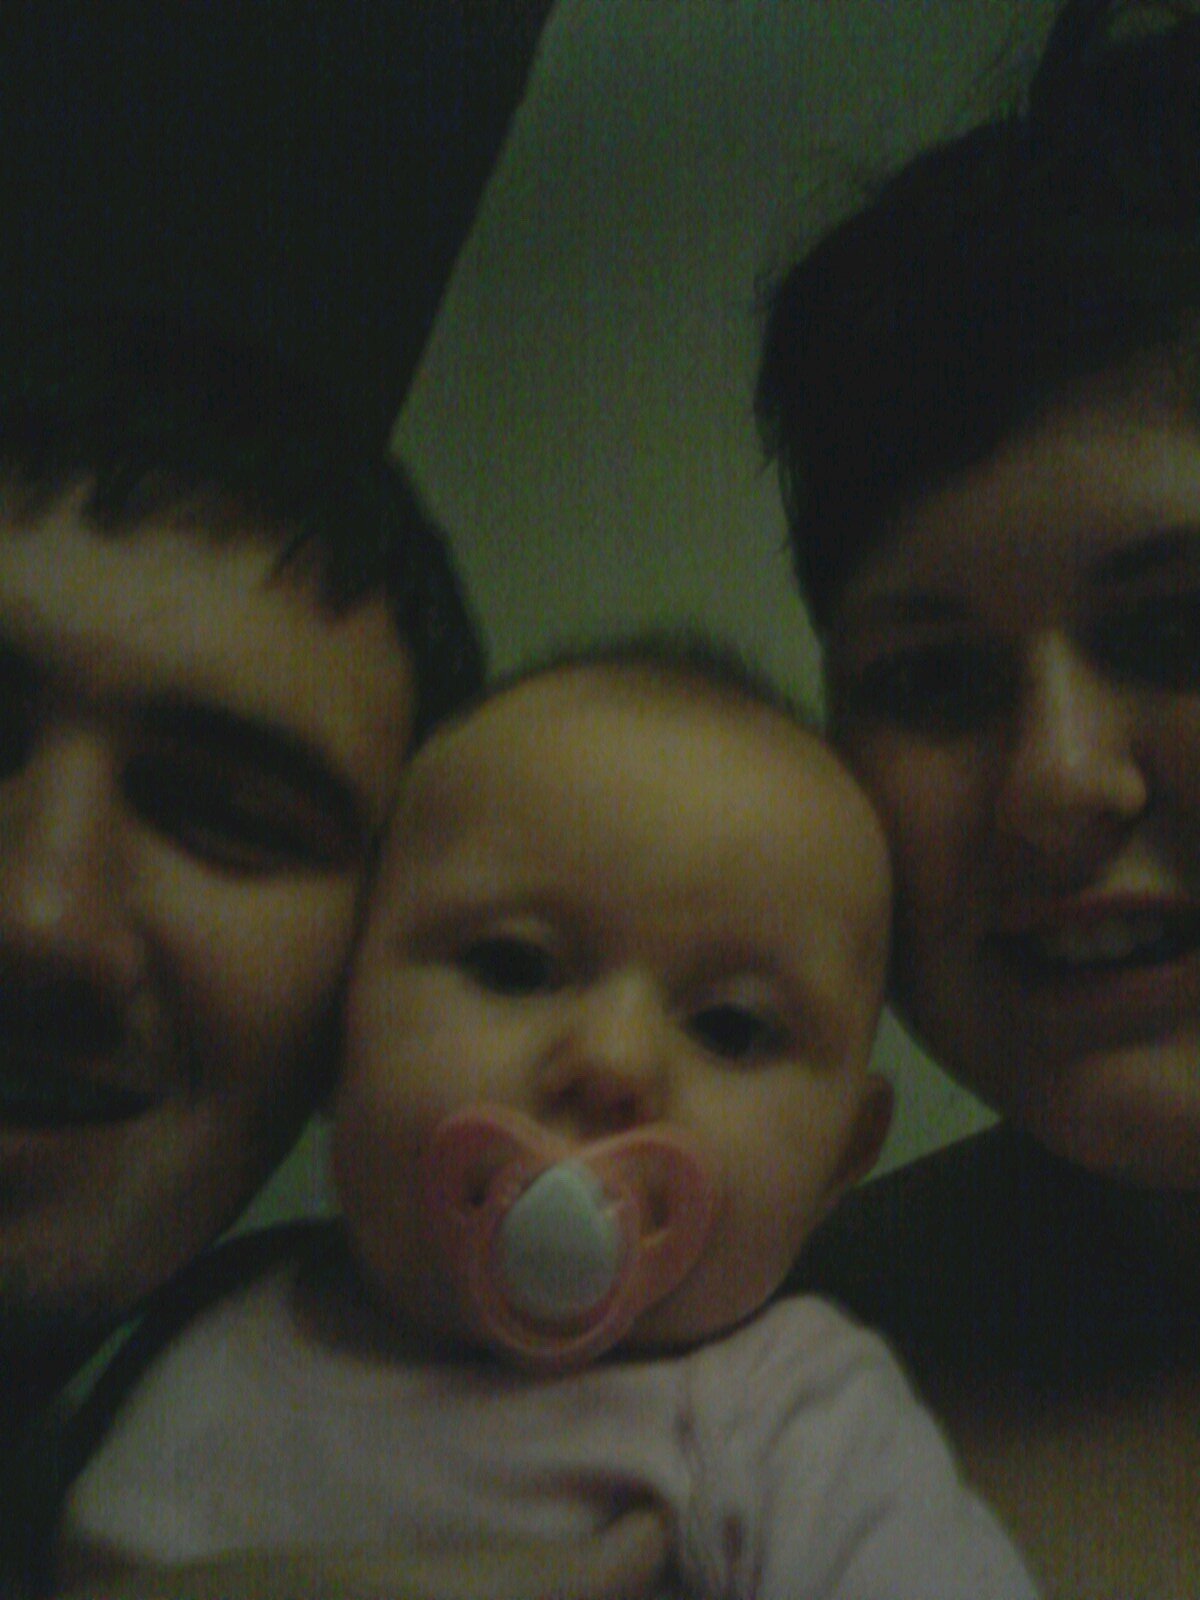 proud dad to a beautiful little girl and has the most beautiful girlfriend i could ask for loveyou both so much.